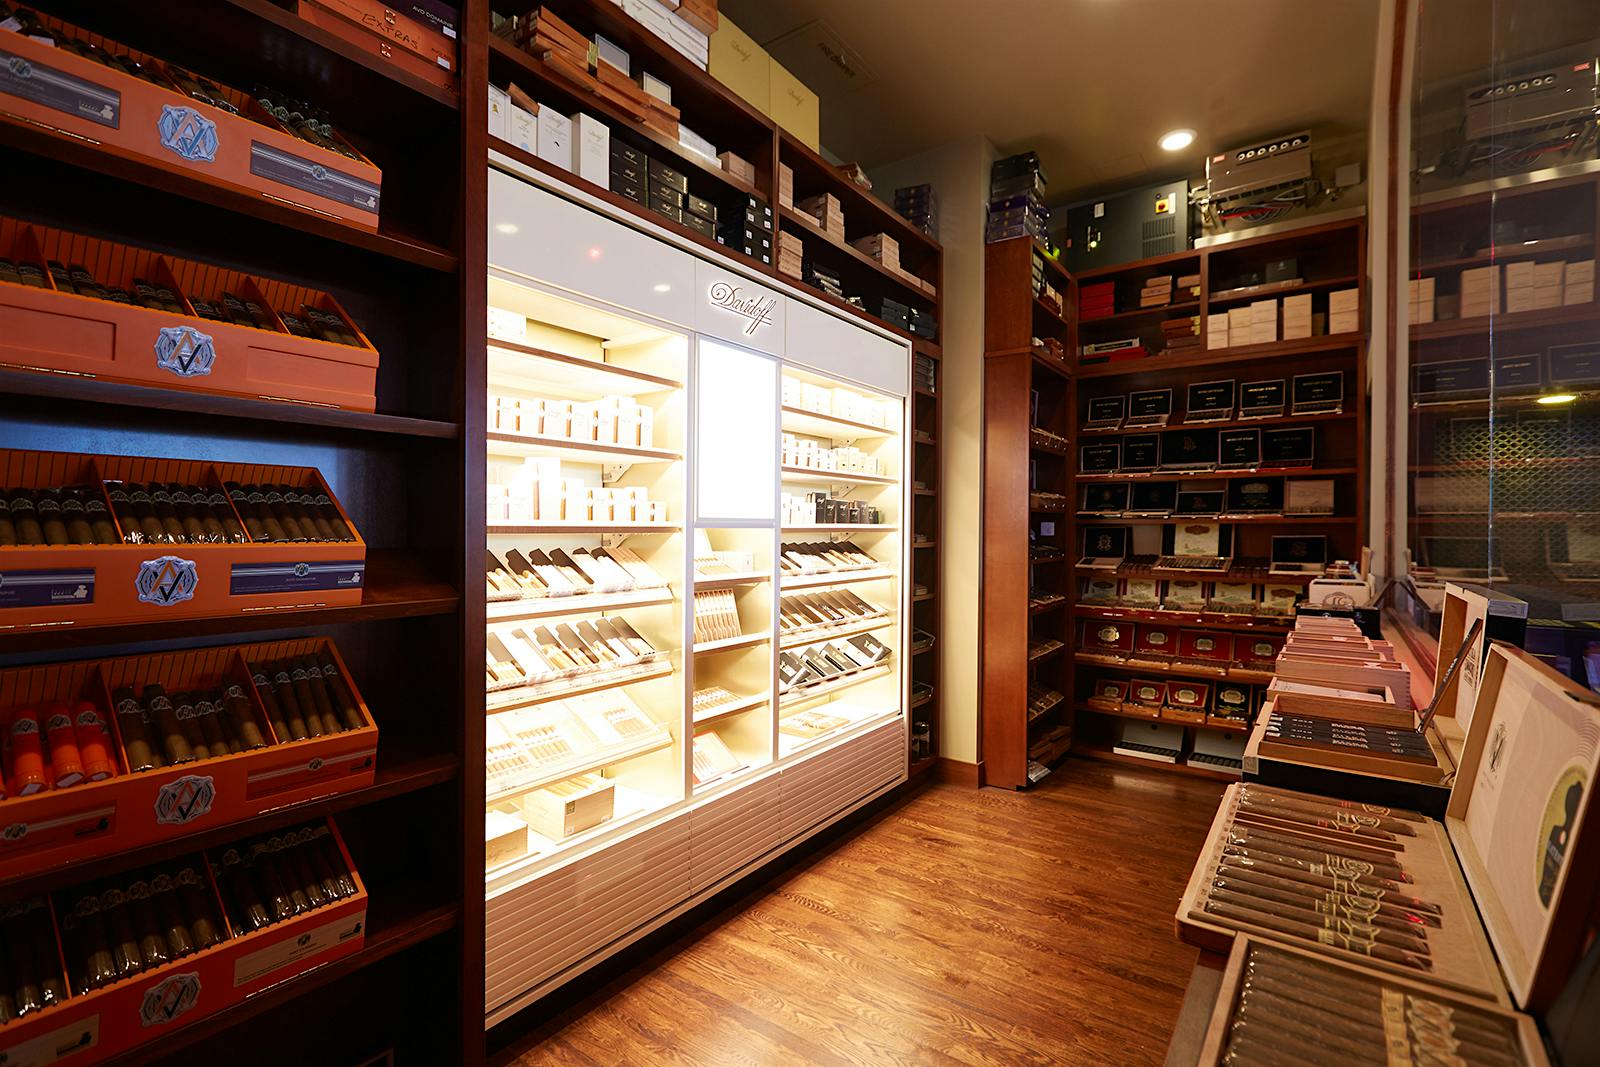 Besides the vast selection of Davidoffs, the humidor is stocked with top brands including Fuente, AVO and Diamond Crown.